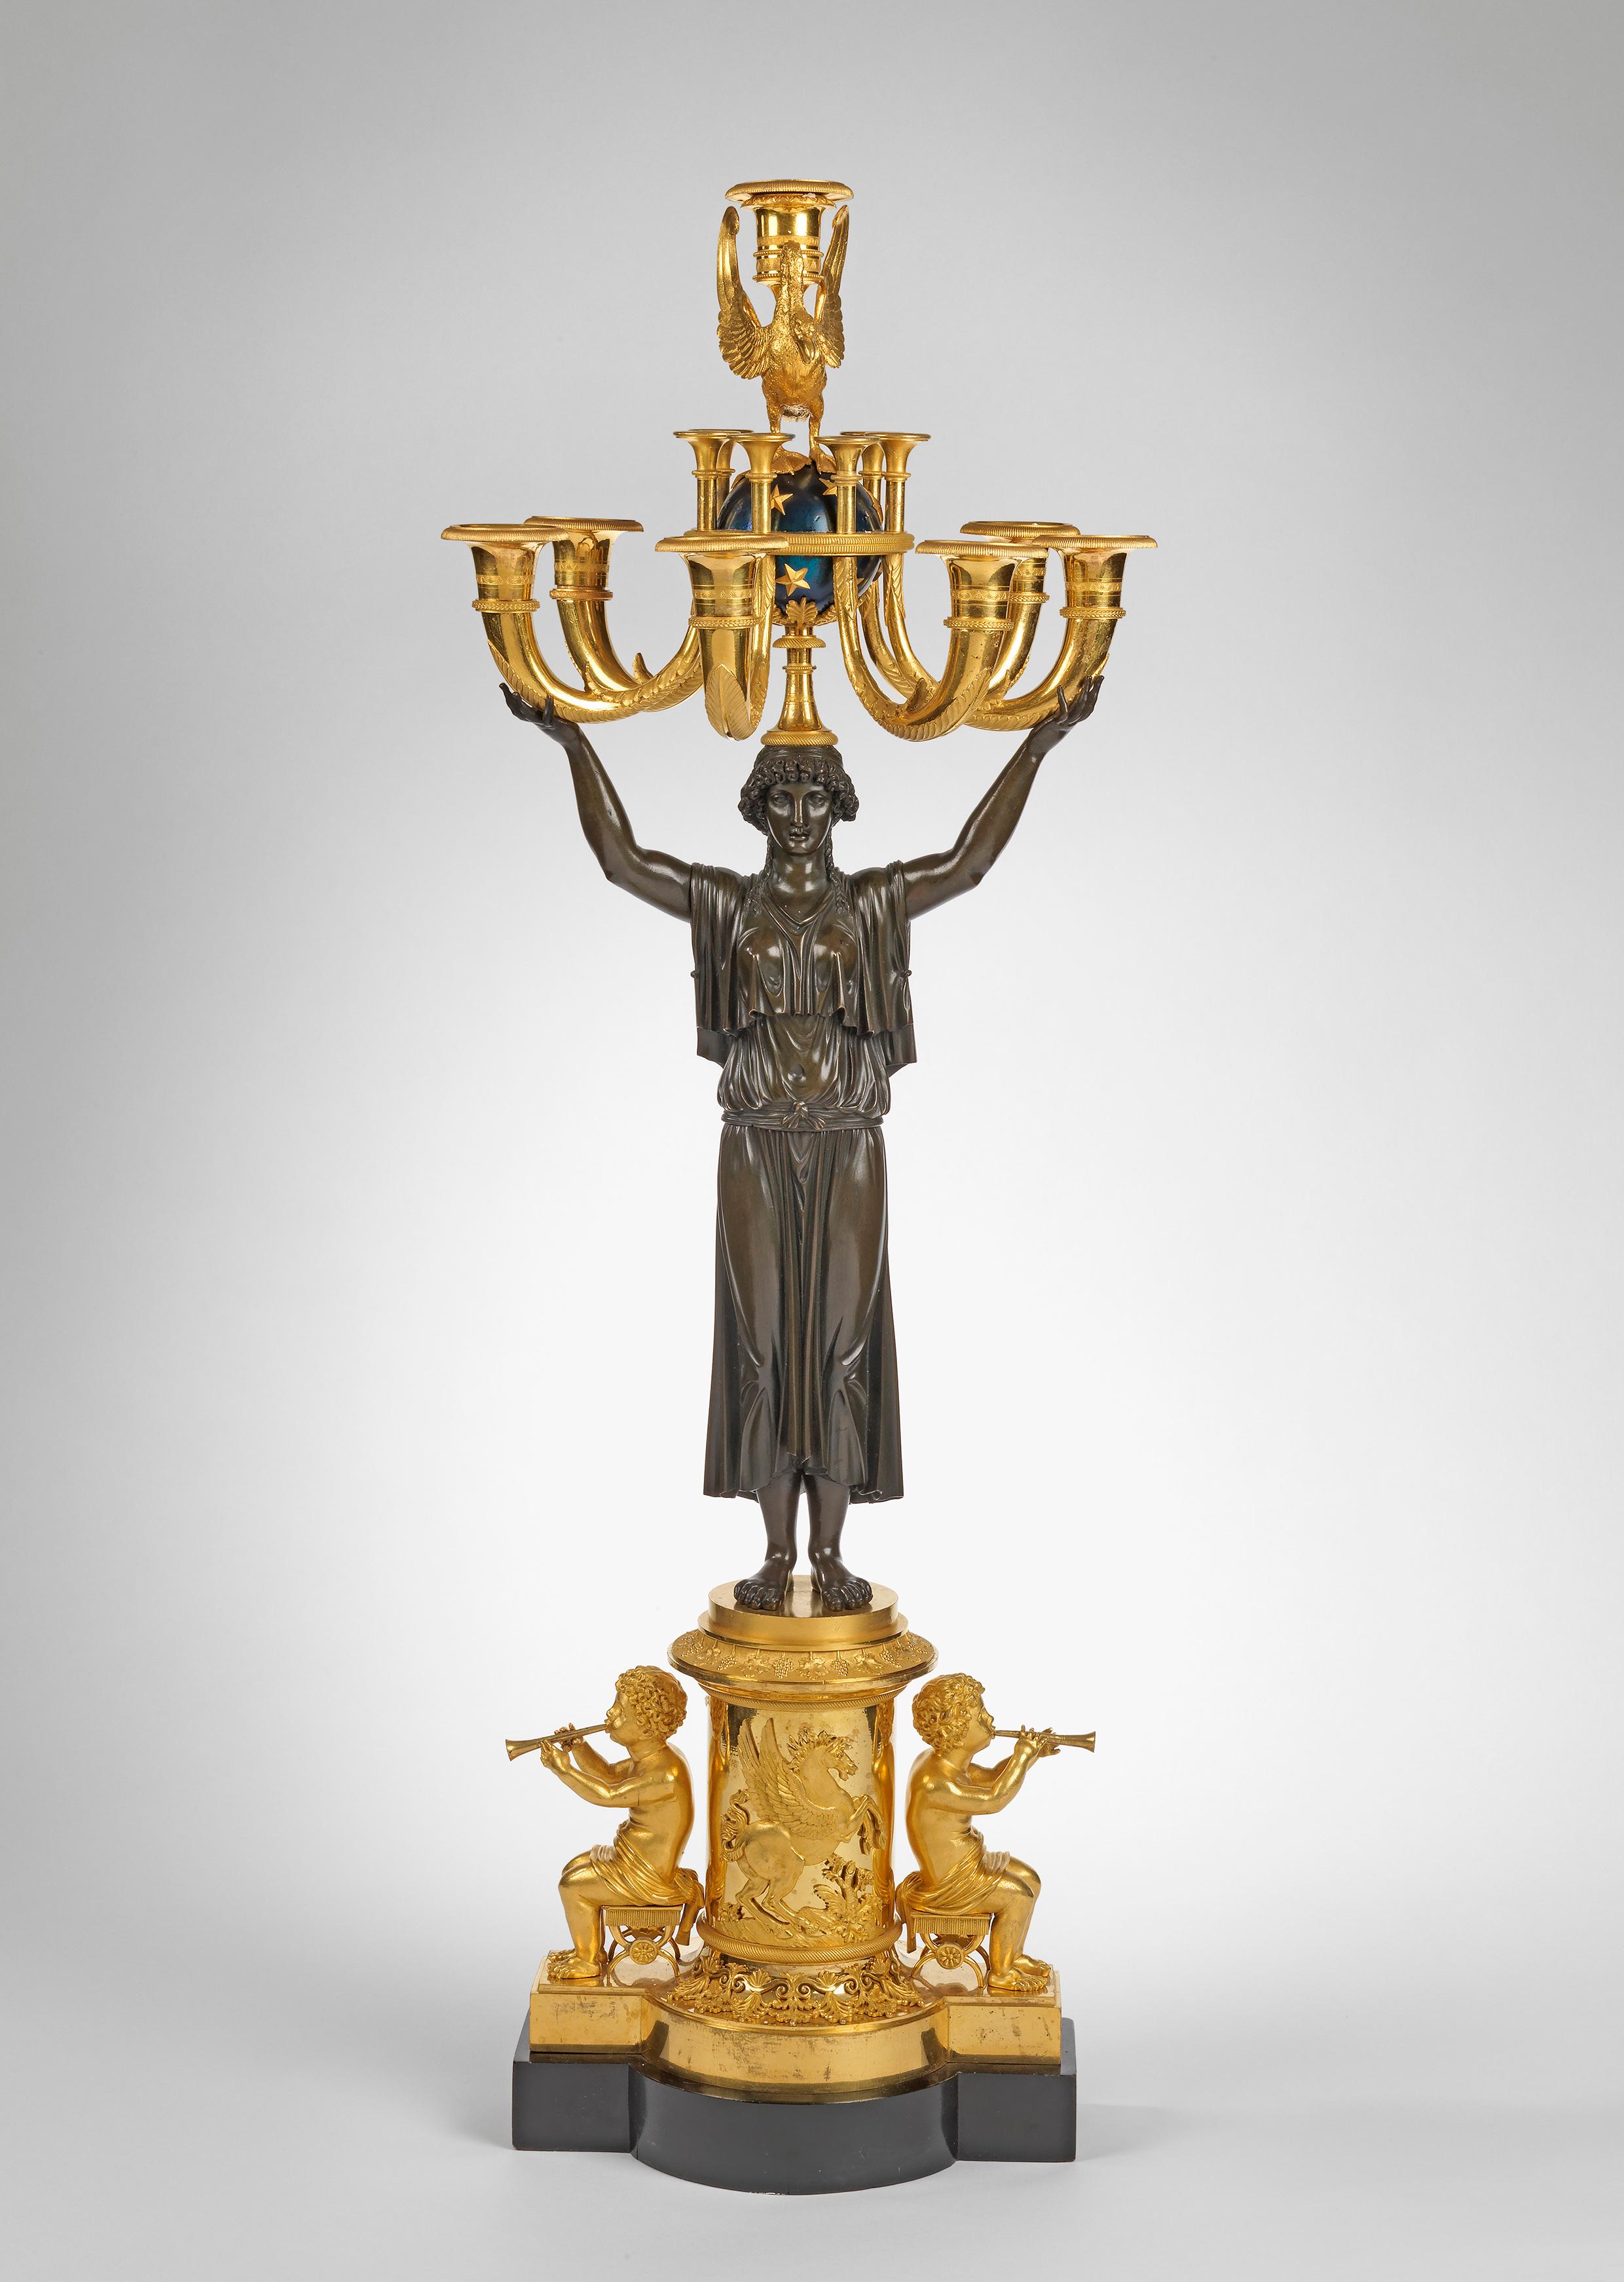 The seven light candelabra are each modelled as a classical figure holding a celestial globe issuing six musical horn-shaped branches and surmounted by a swan with a further branch, on a circular base with a Pegasus figure flanked by two Putti